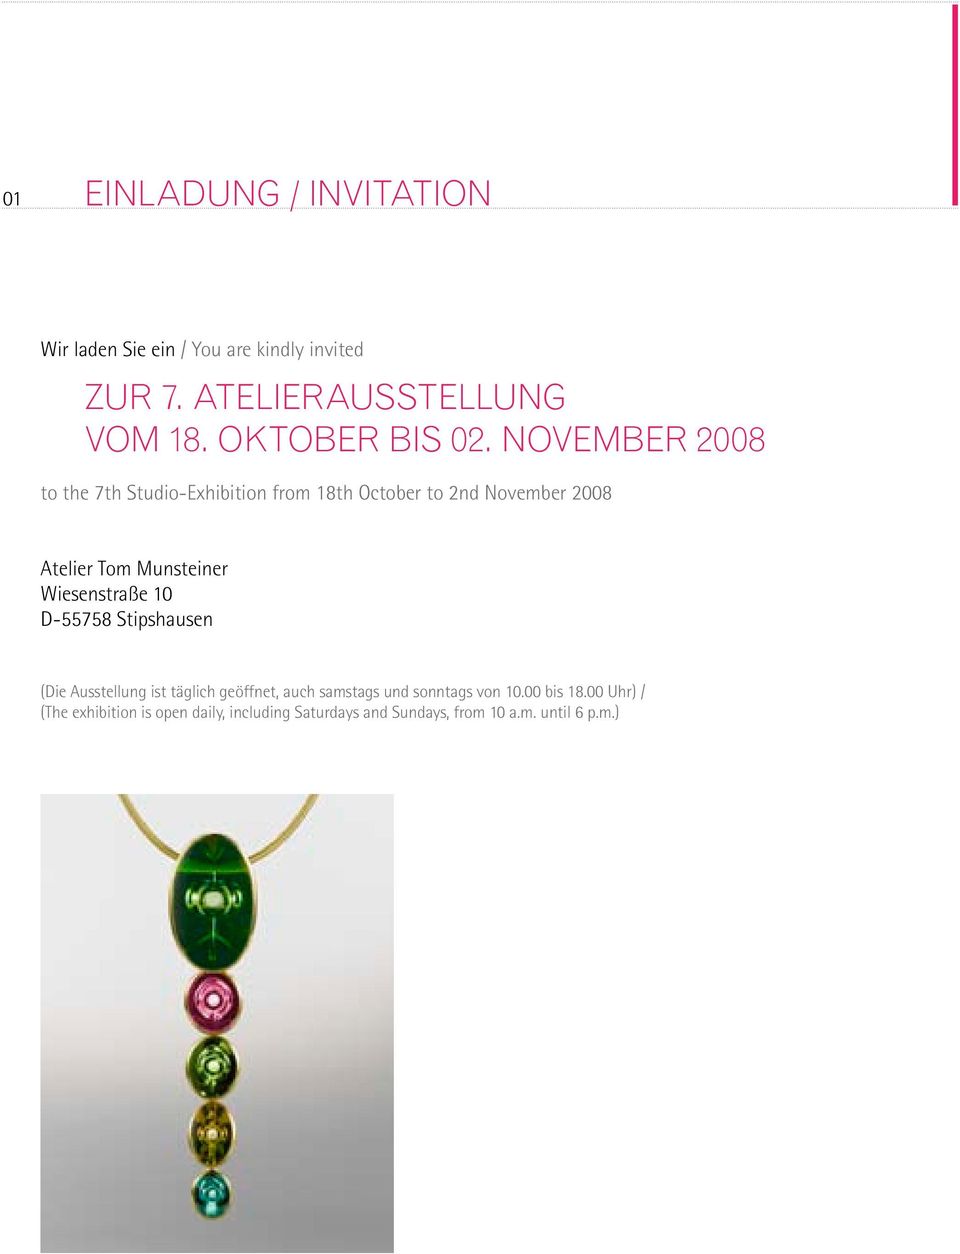 November 2008 to the 7th Studio-Exhibition from 18th October to 2nd November 2008 Atelier Tom Munsteiner